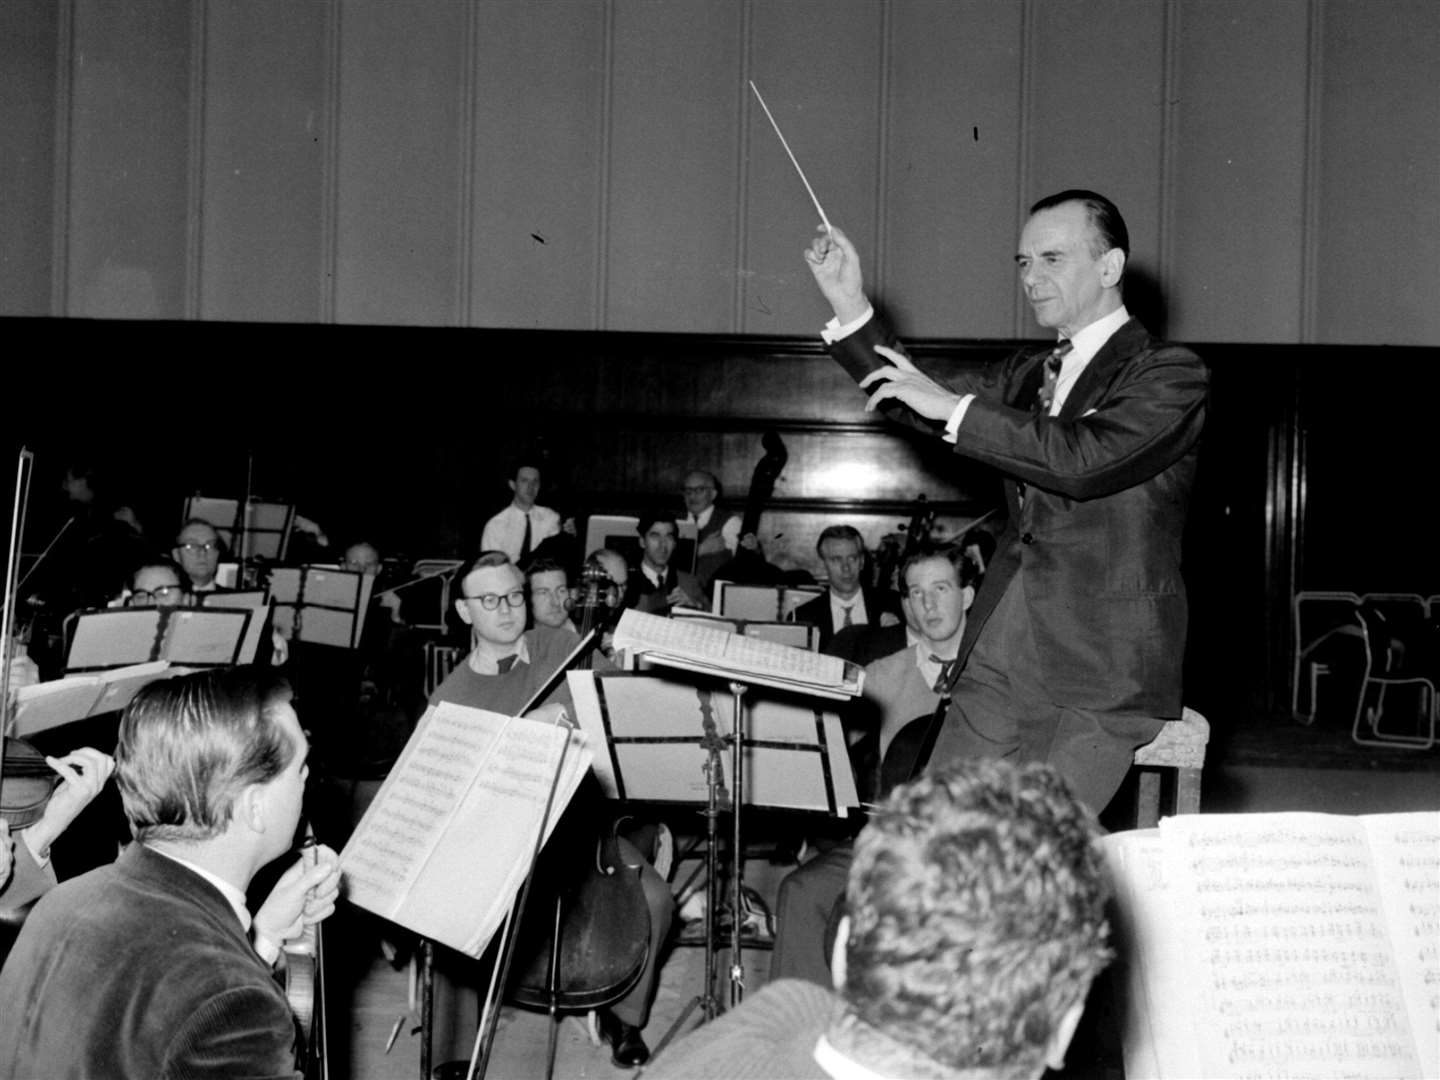 Sir Malcolm Sargent in inimitable style, leading members of the London Philharmonic Orchestra (PA Archive/PA Images)